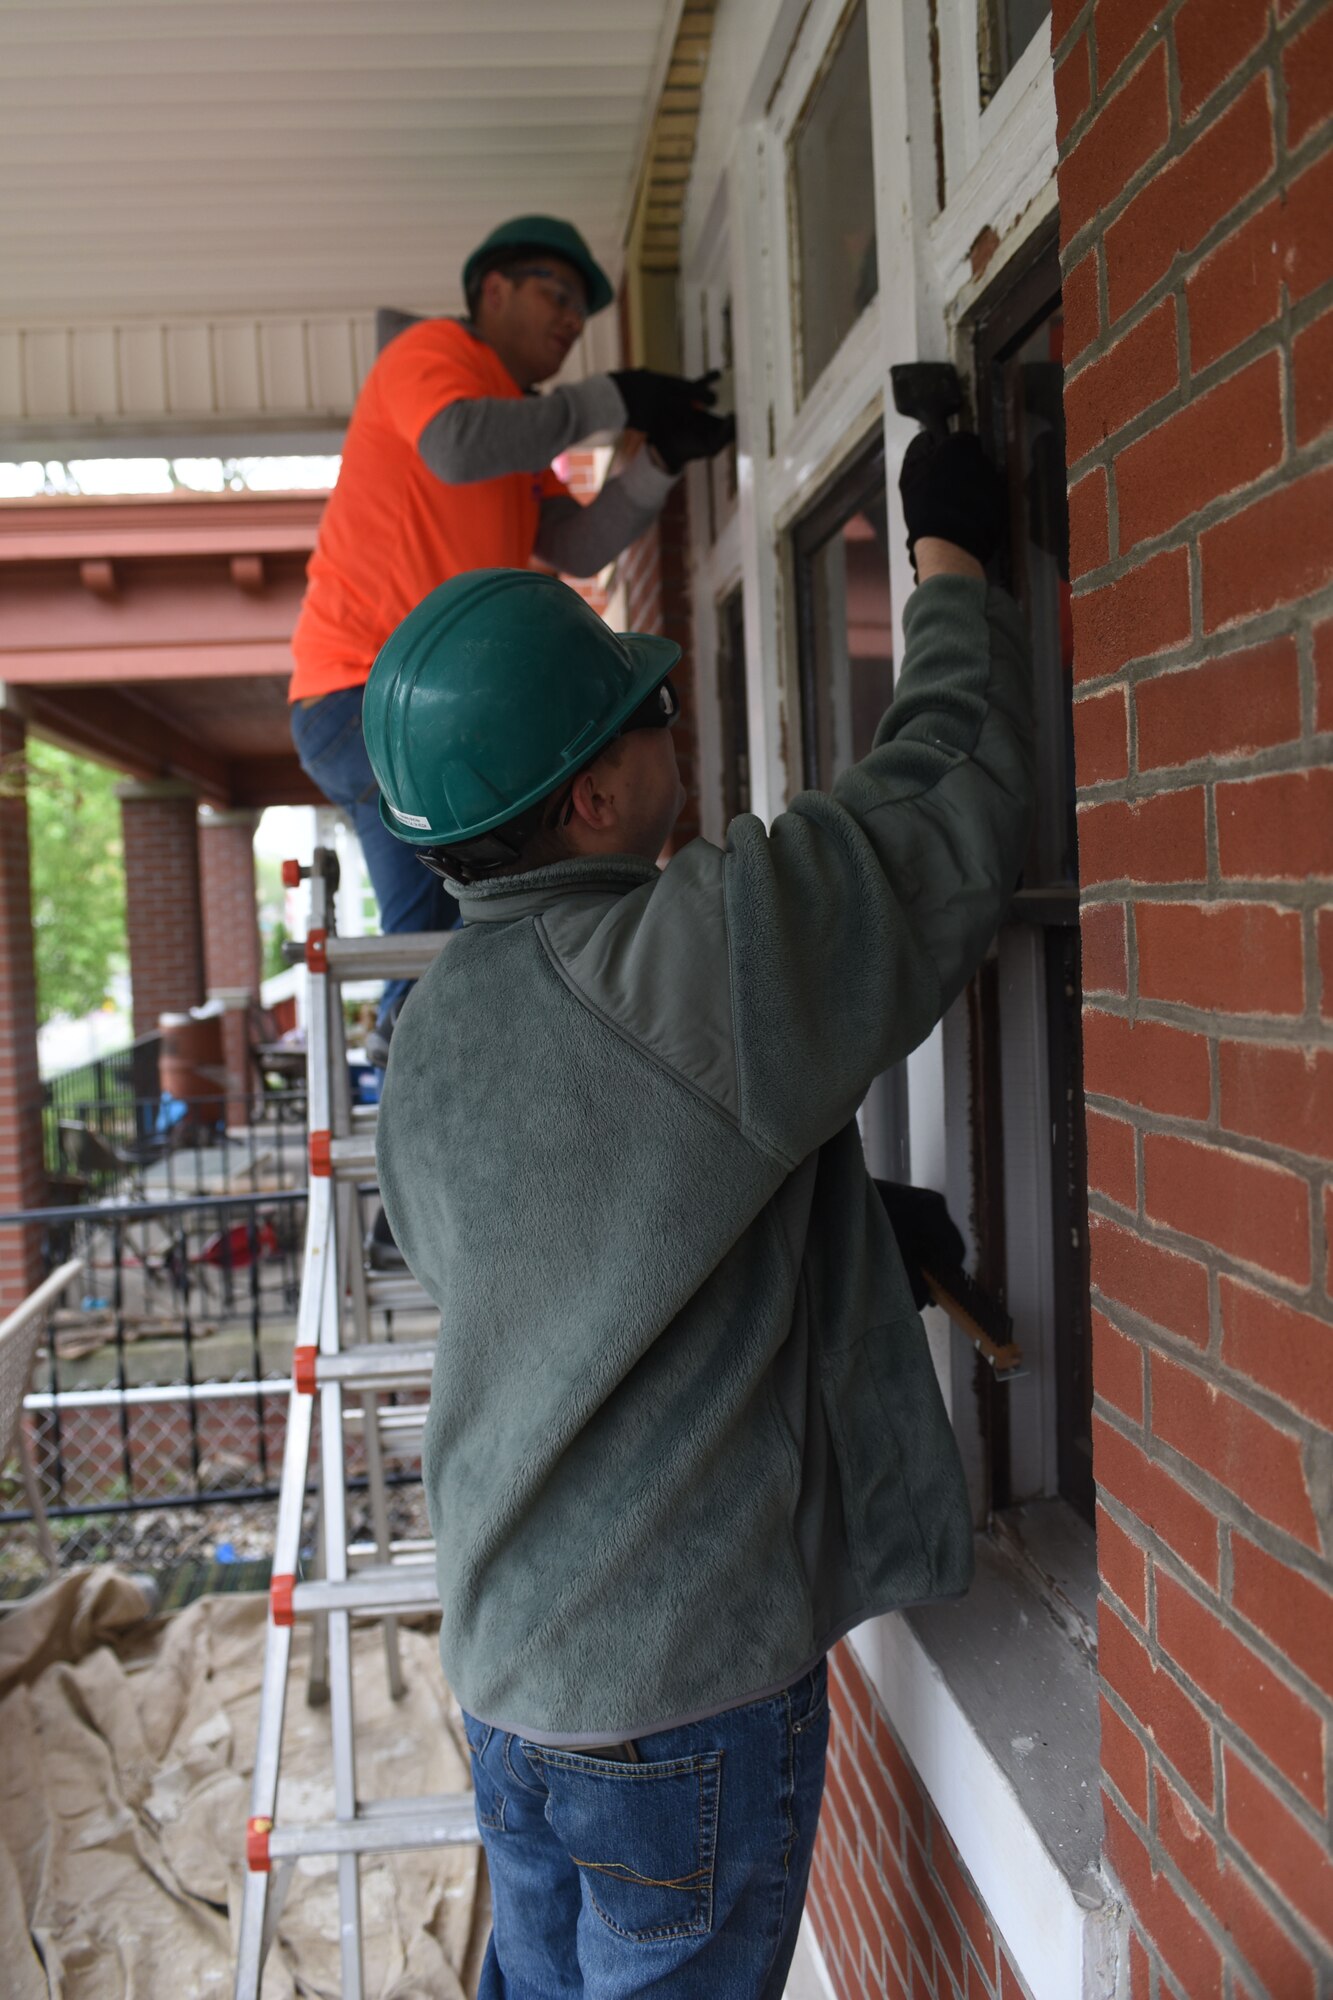 U.S. Air Force Tech. Sgt. Richard Green and Airman 1st Class Preston Reese, with the 121st Air Refueling Wing, chip away at old paint during a community outreach program with Habitat for Humanity April 23, 2016 Columbus, Ohio. EFAC Airmen helped to build a new walkway railing, repaint window sills and replace old windows for a local family in need. (U.S. Air National Guard photo by Airman 1st Class Ashley Williams/Released)